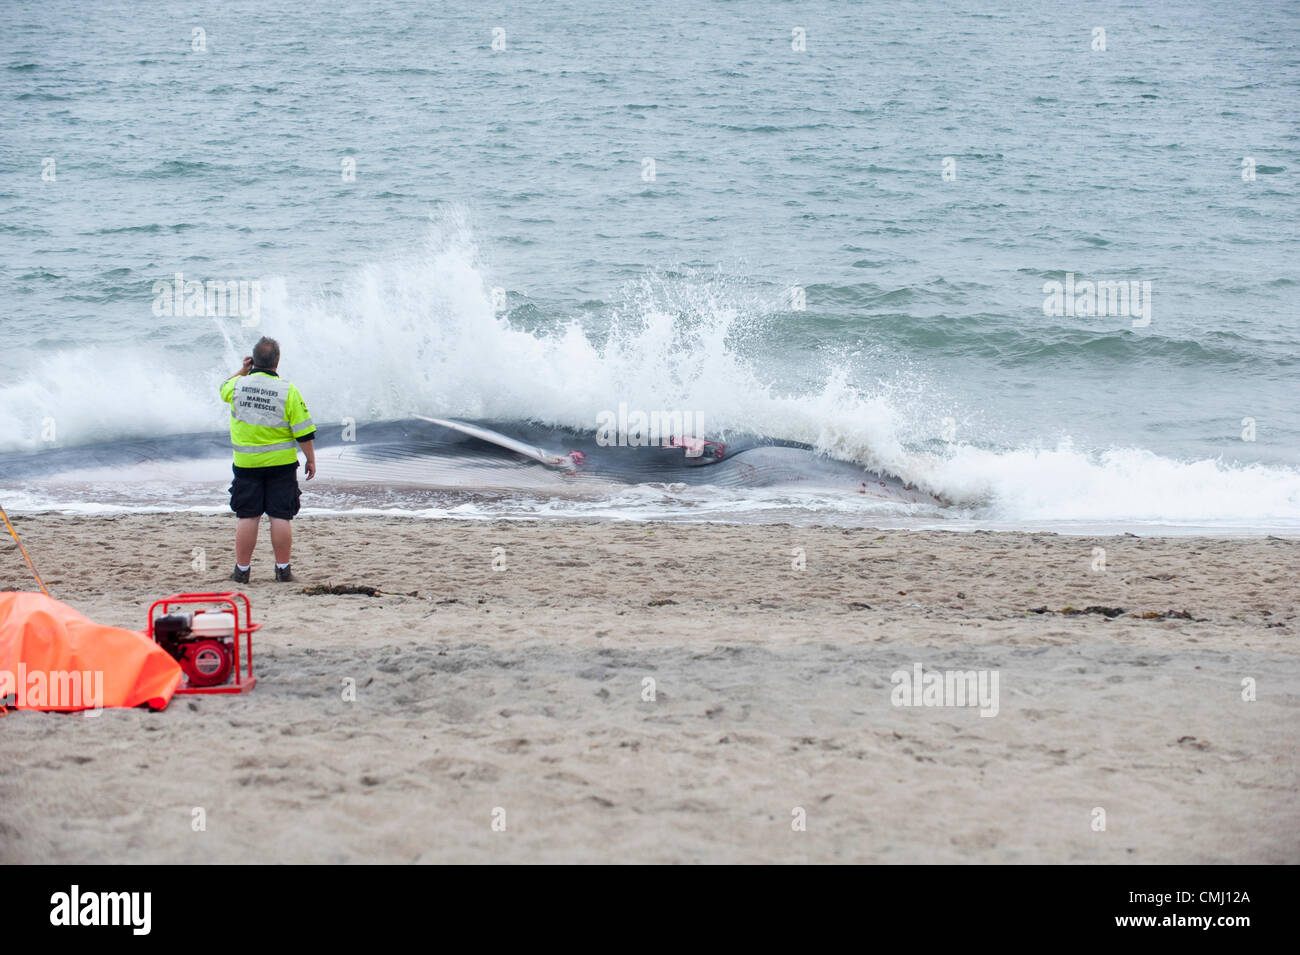 St Austell, Cornwall, UK. 13th August 2012. A fin whale lies beached on Carlyon Bay Beach near St Austell, Cornwall. The whale had earlier been spotted in St Austell Bay. According to reports, experts said the animal would have to be put down. Stock Photo